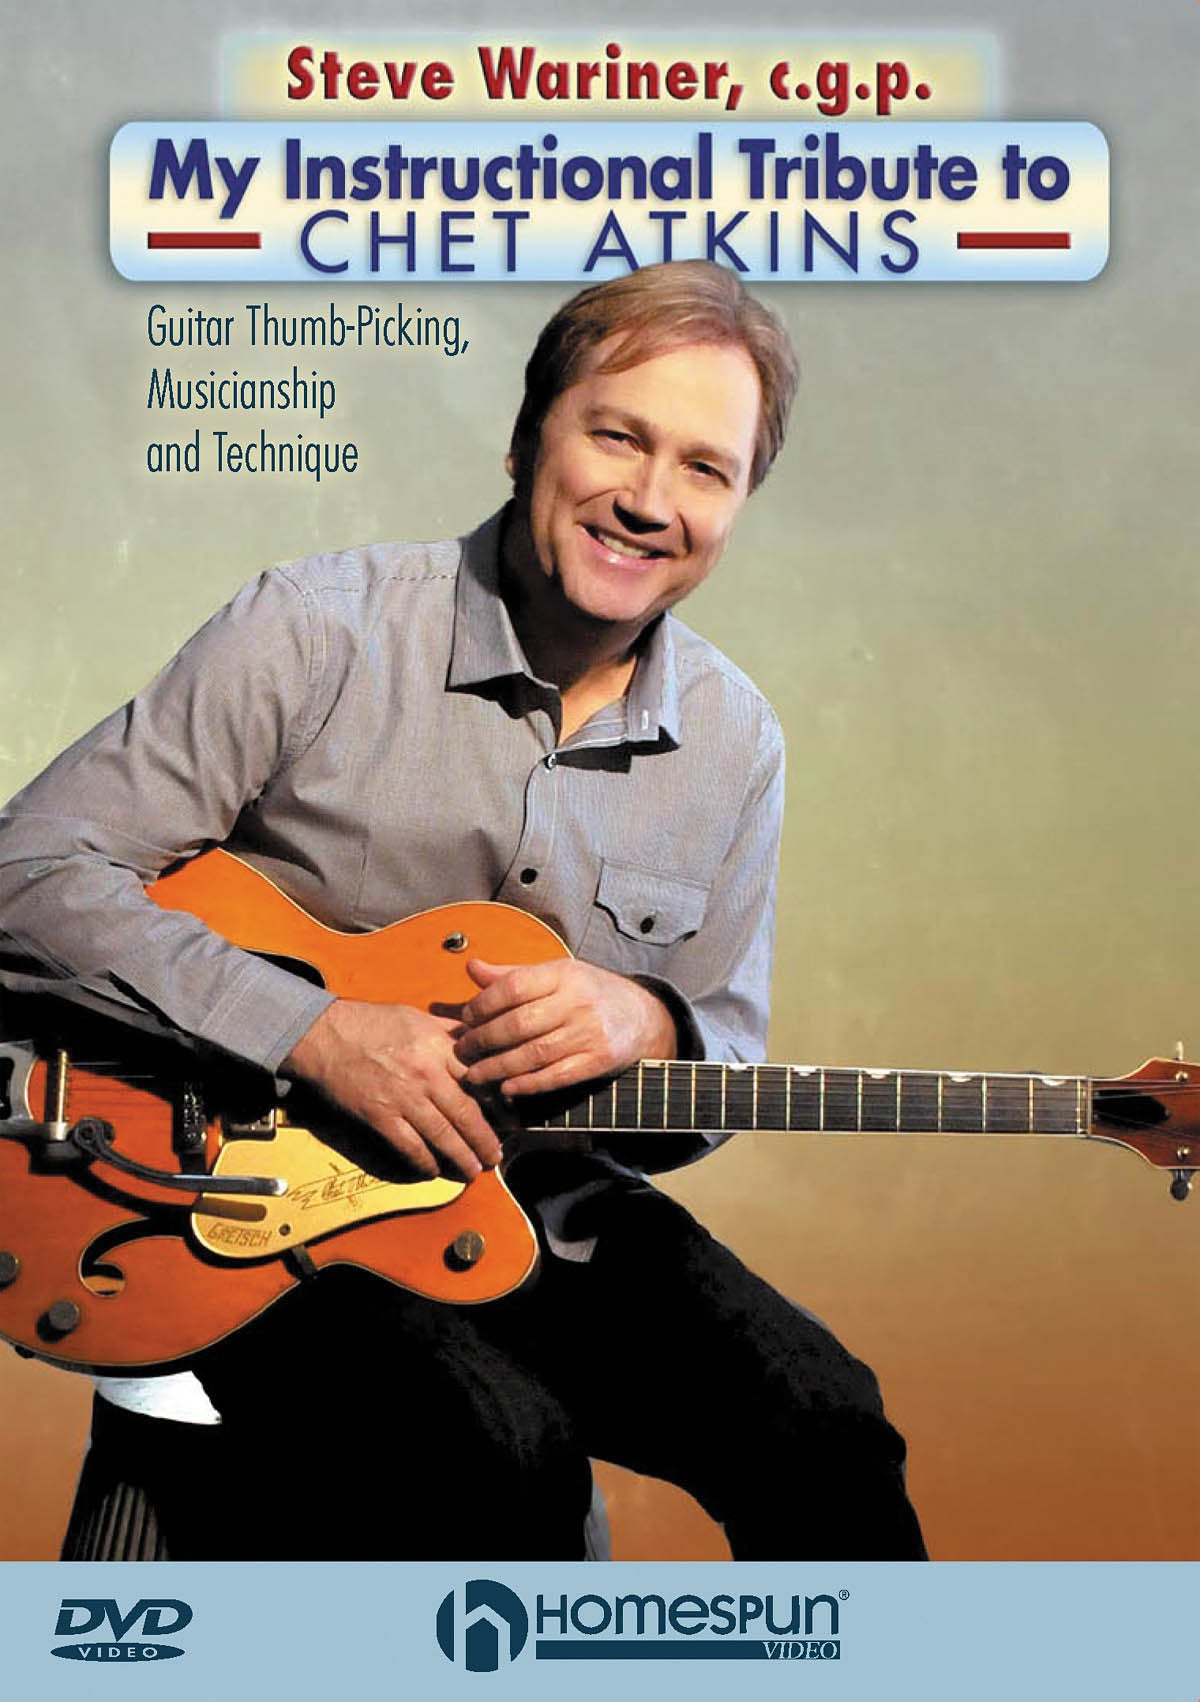 Image 1 of DIGITAL DOWNLOAD ONLY - Steve Wariner, C.G.P. - My Instructional Tribute to Chet Atkins - SKU# 300-DVD374 : Product Type Media : Elderly Instruments